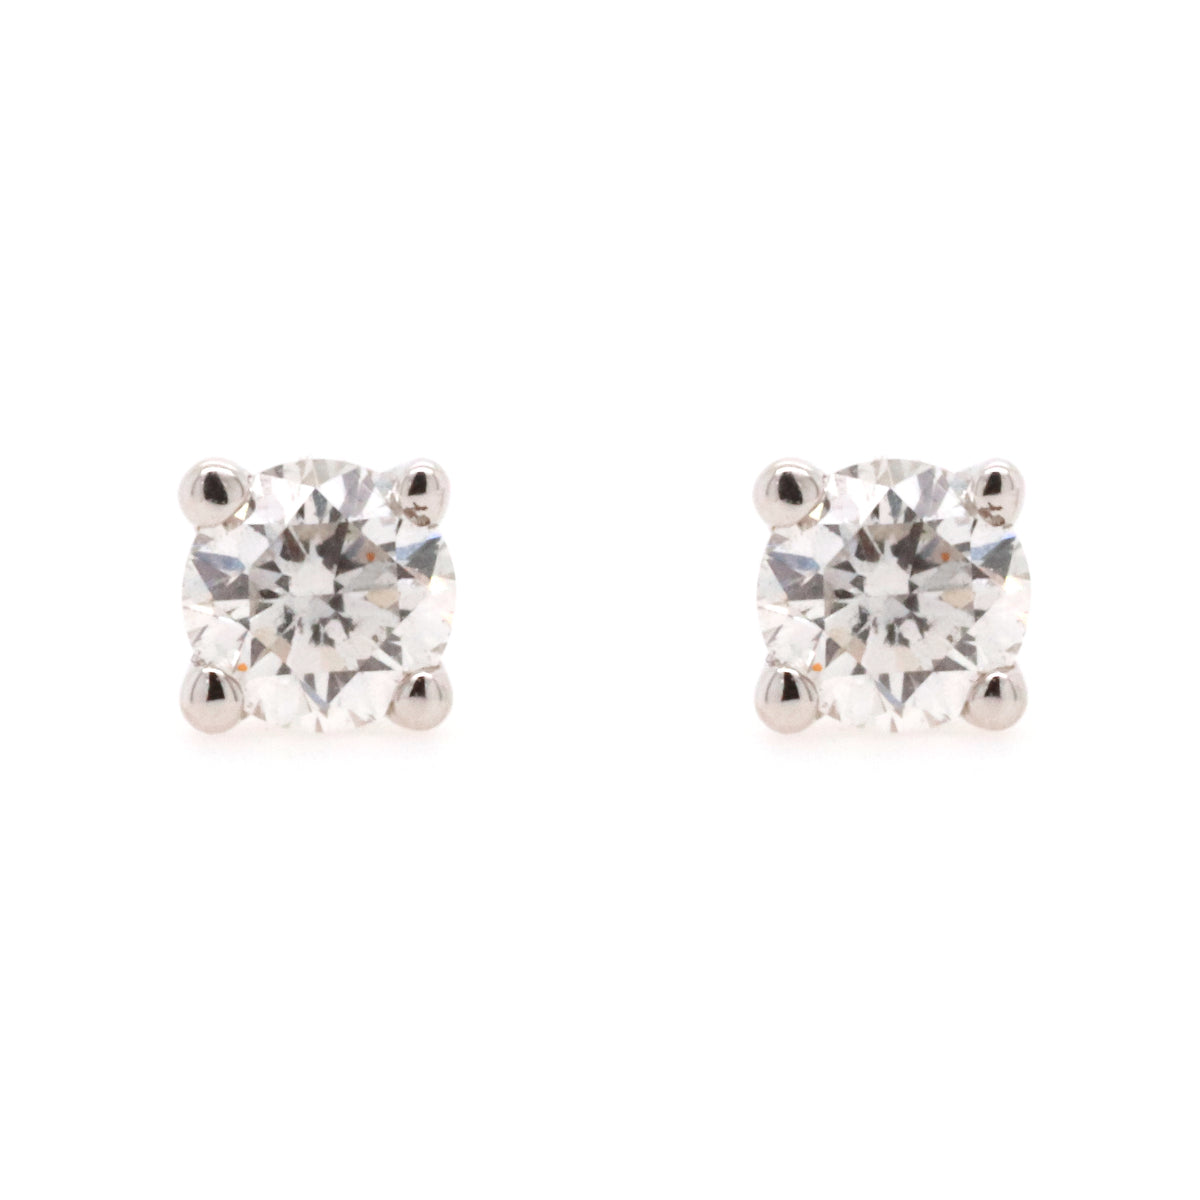 Stud Earrings with 0.18 Carat Total Weight of Diamonds in 9ct White gold - Duffs Jewellers